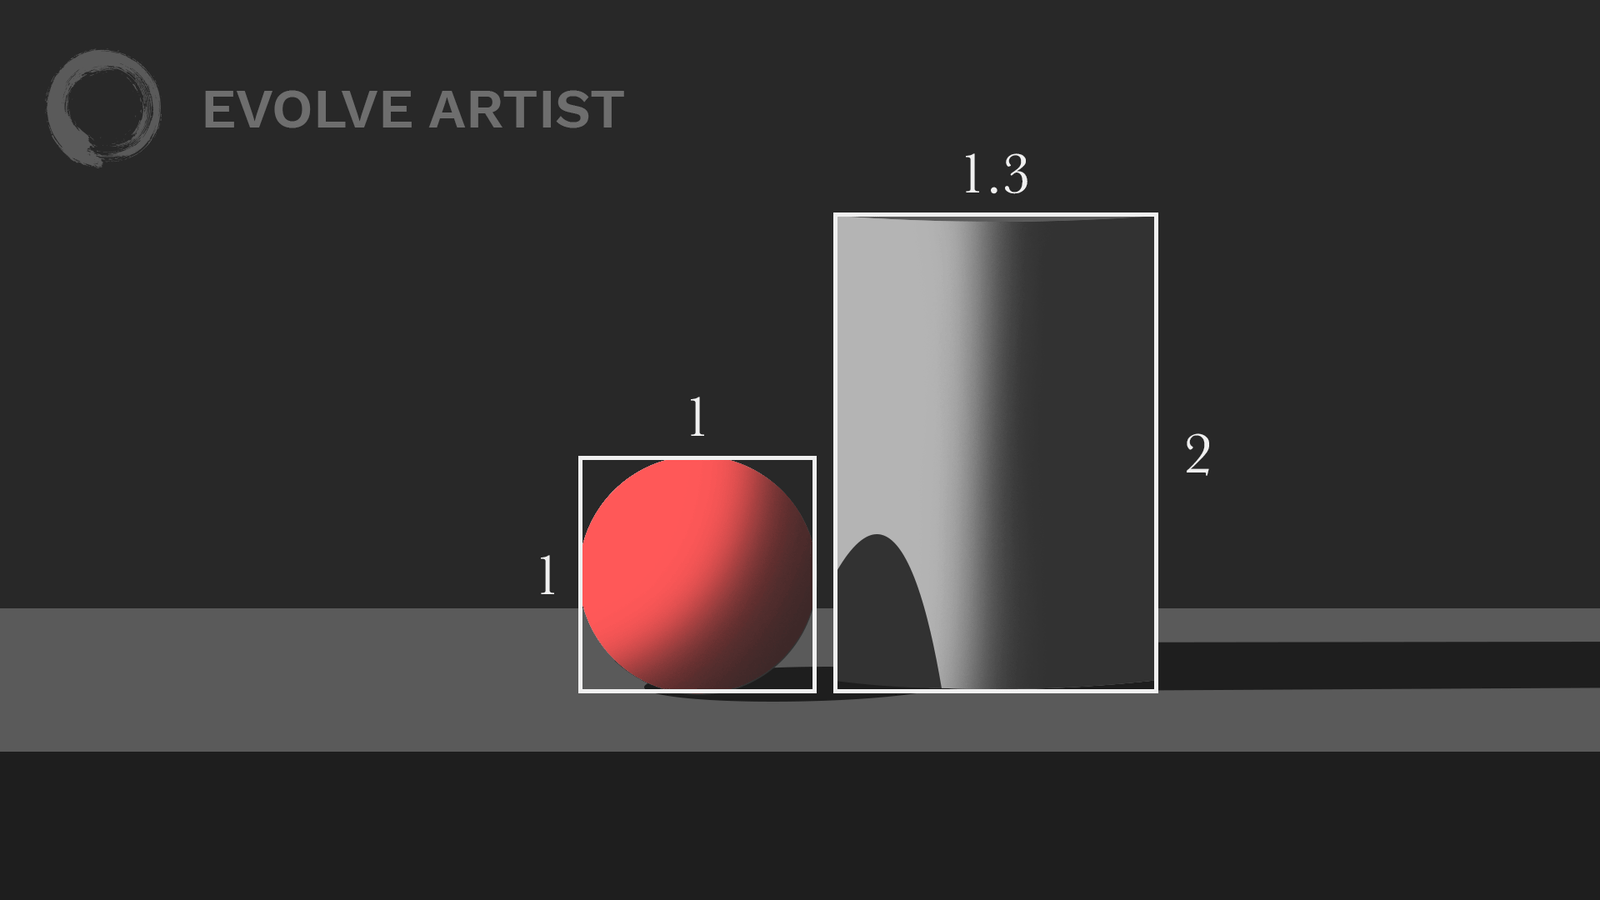 Images can be scaled without altering the accuracy of its proportions with Evolve’s proportional drawing method. 